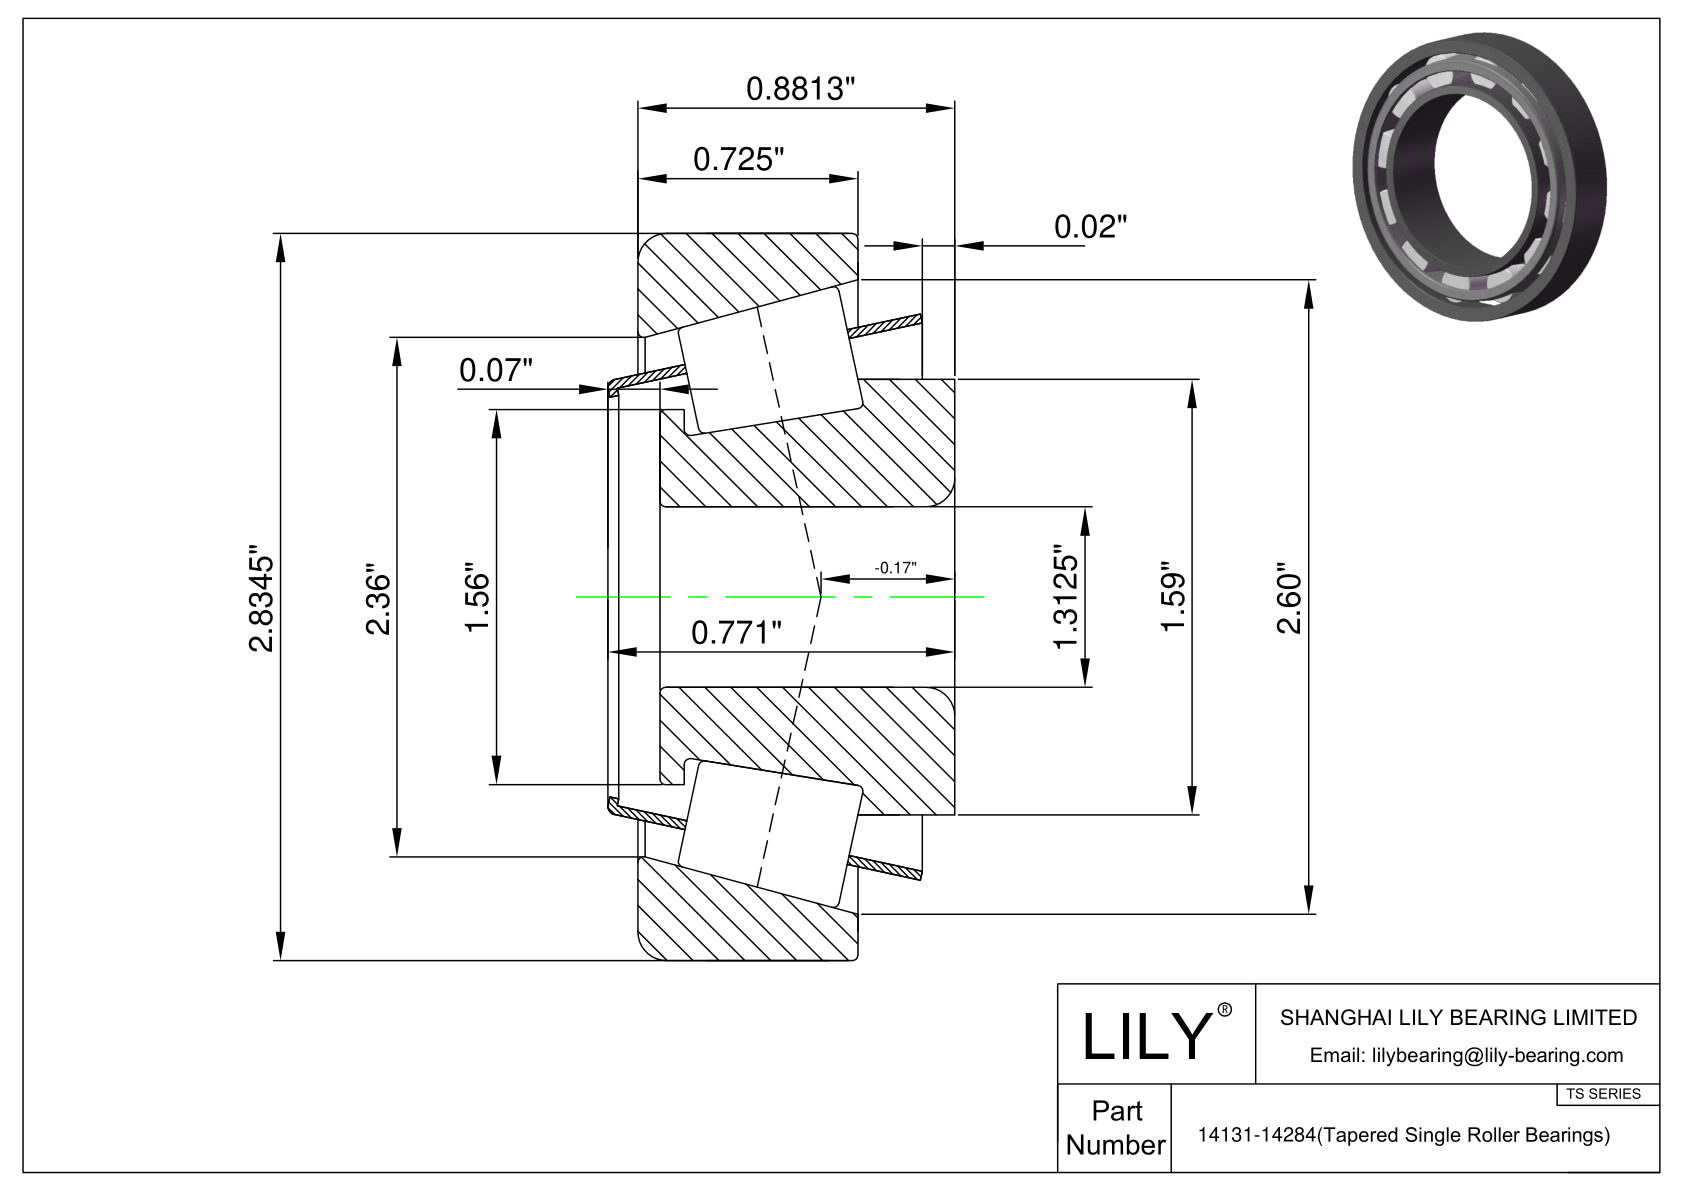 14131-14284 TS (Tapered Single Roller Bearings) (Imperial) cad drawing